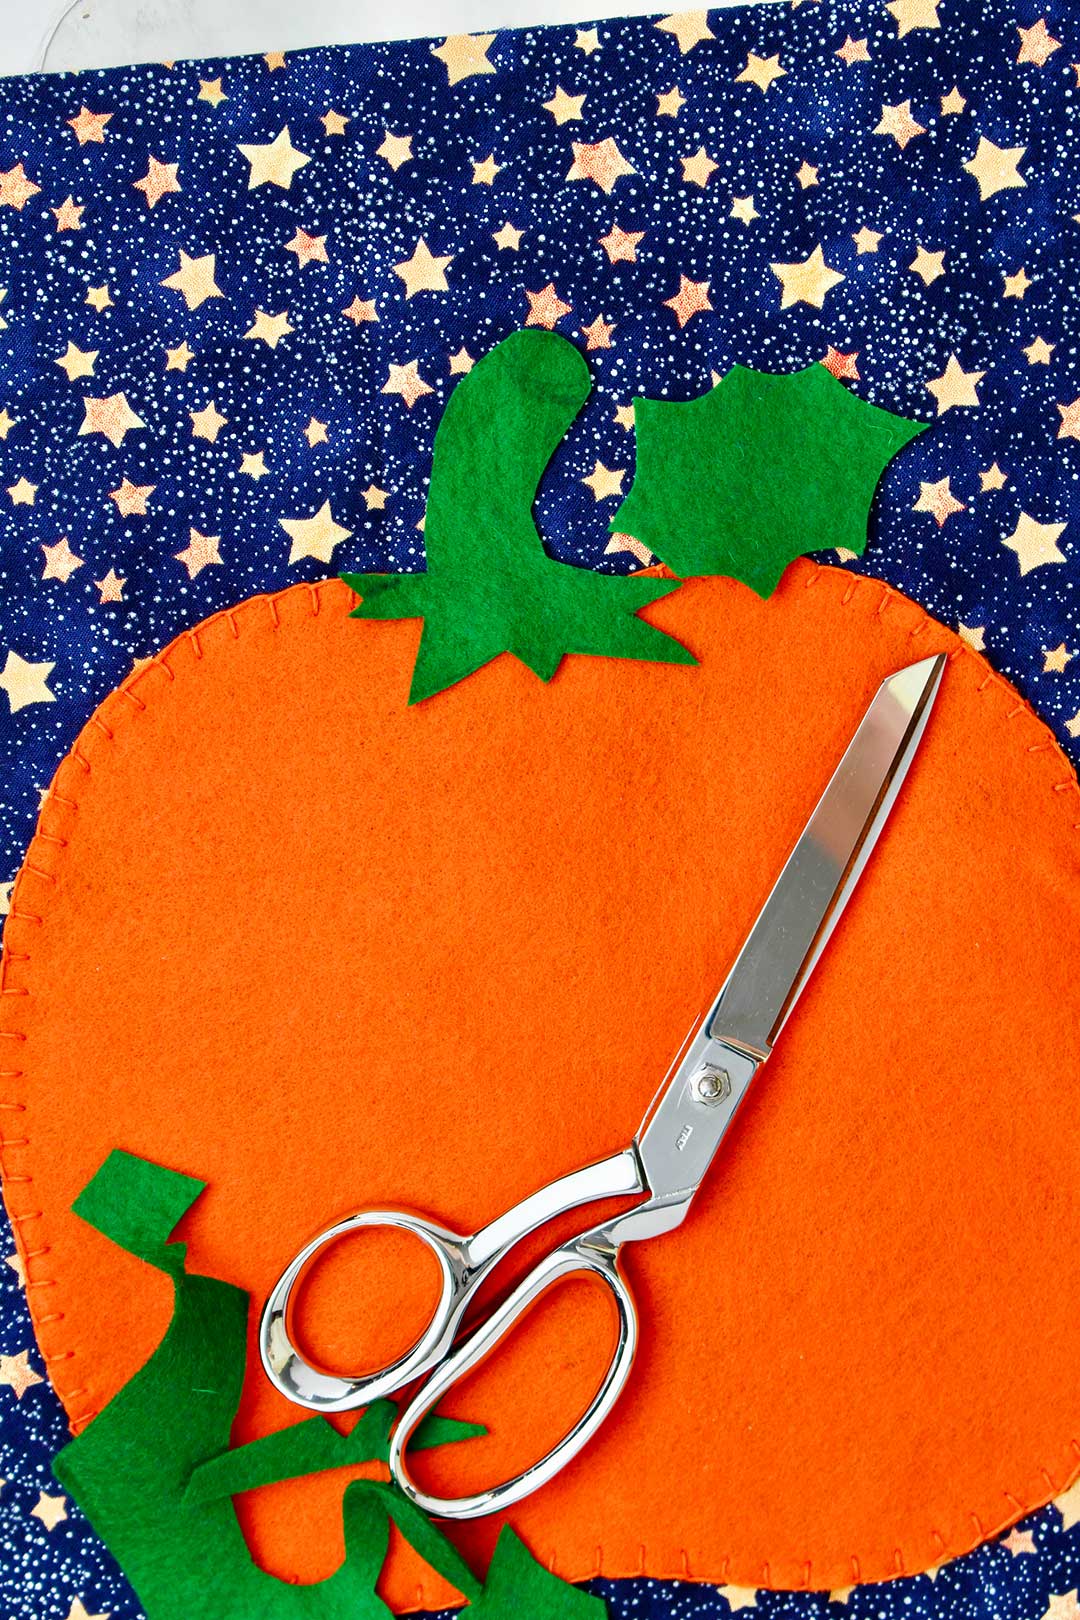 Felt pumpkin cut out resting on starry blue fabric with scissors and green detail fabric scraps on top.